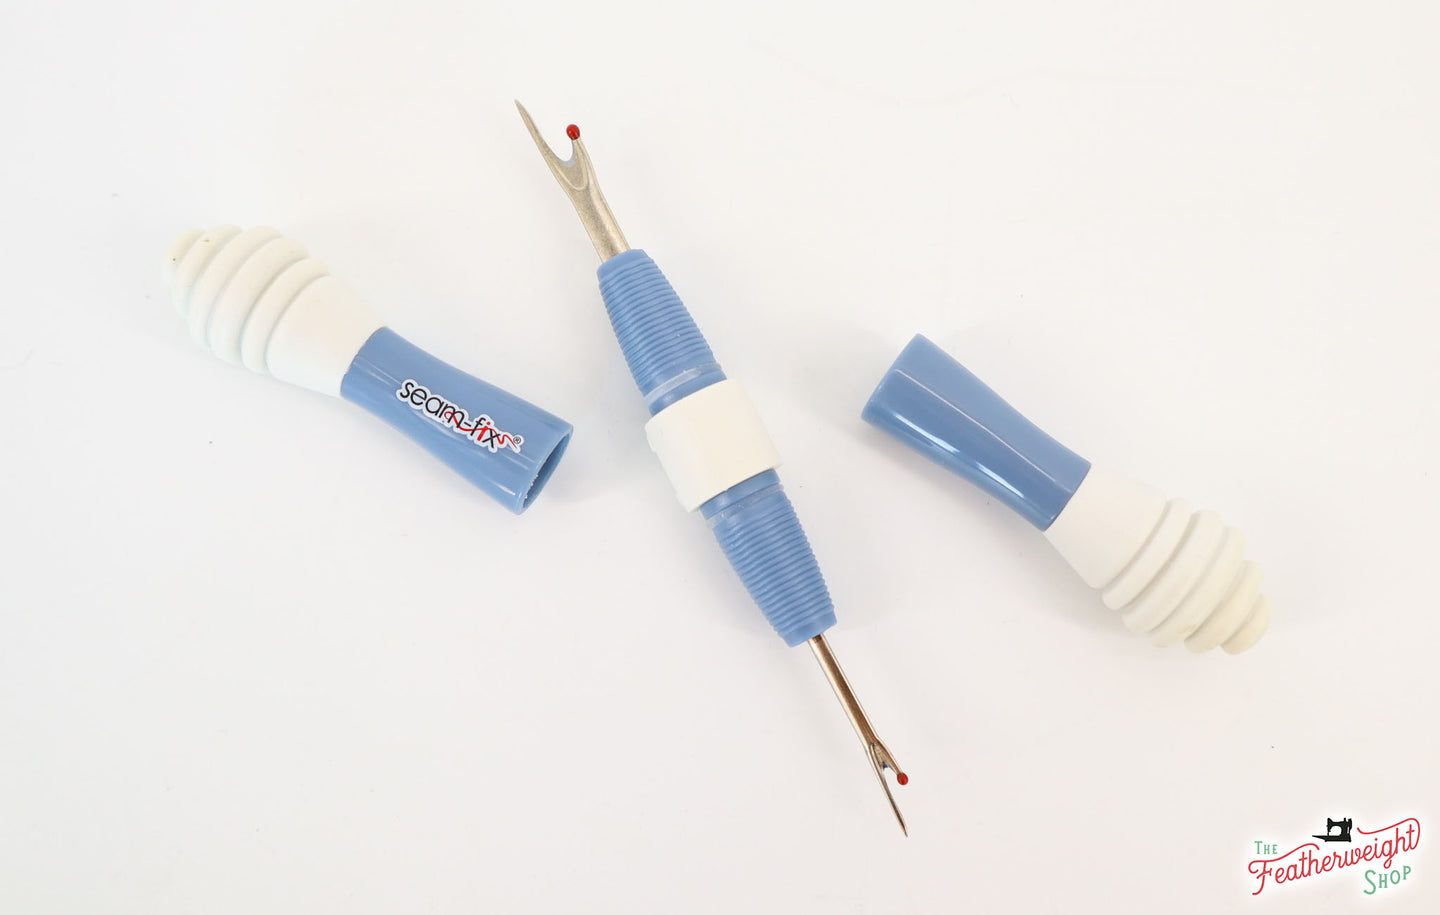 Seam Ripper and Thread Remover, Double-Sided